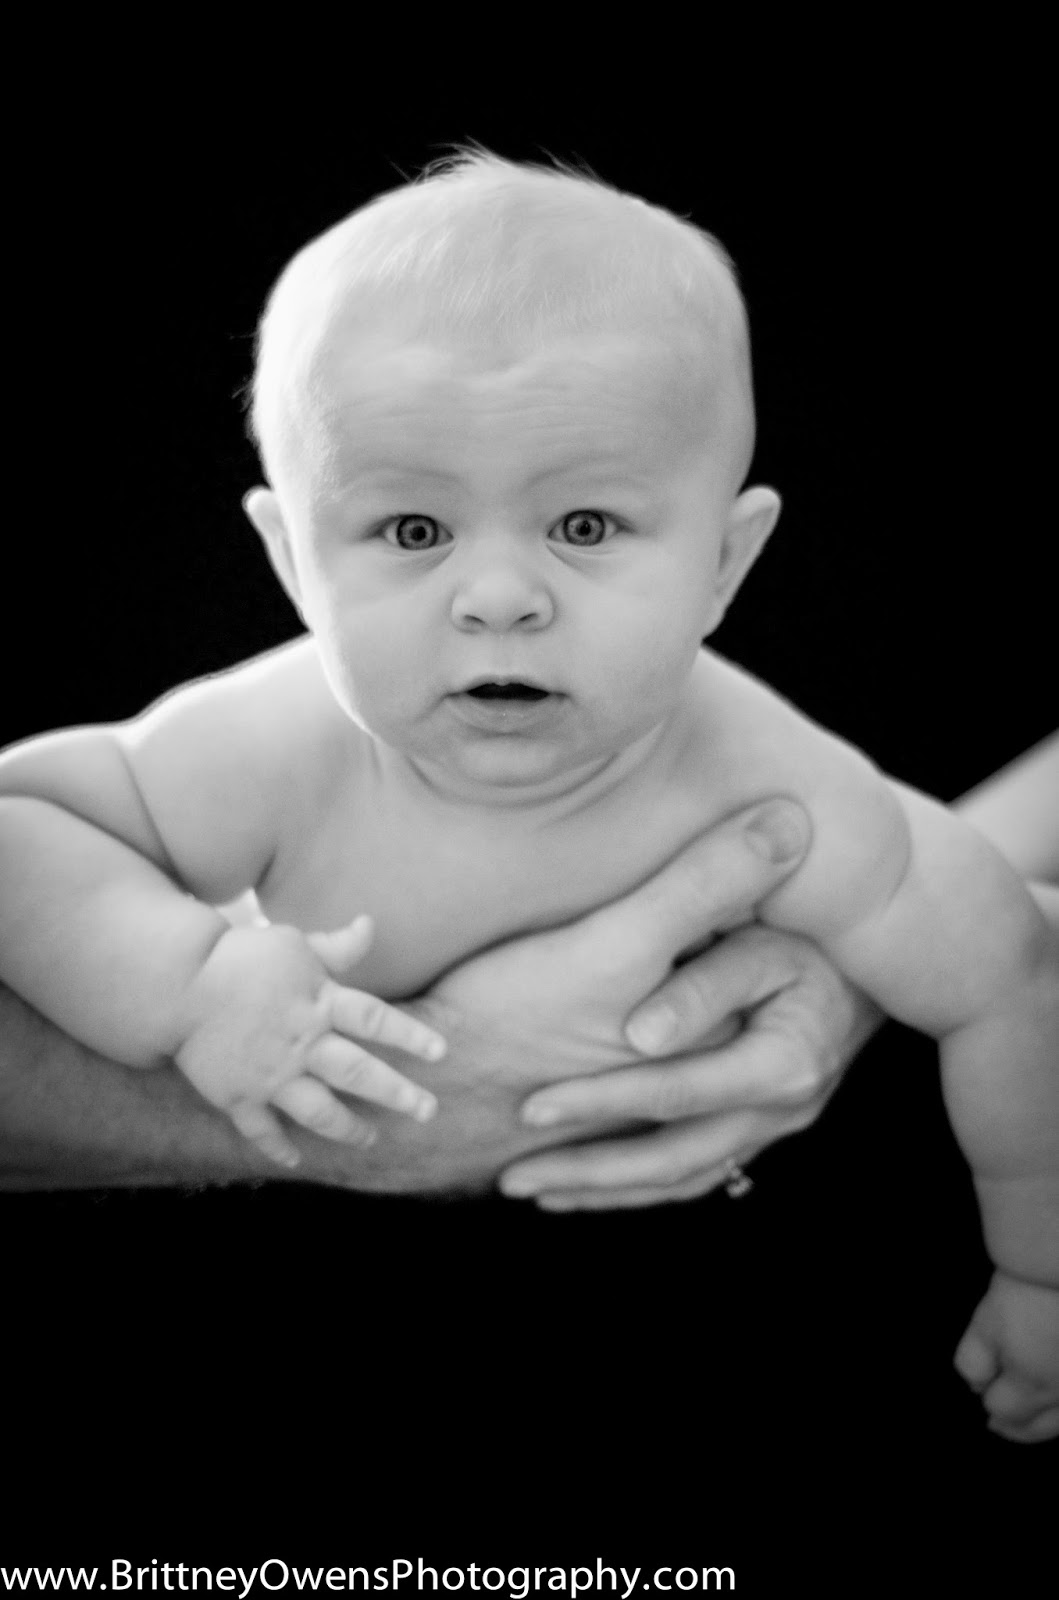 Brittney Owens Photography: Baby B's 6 month session